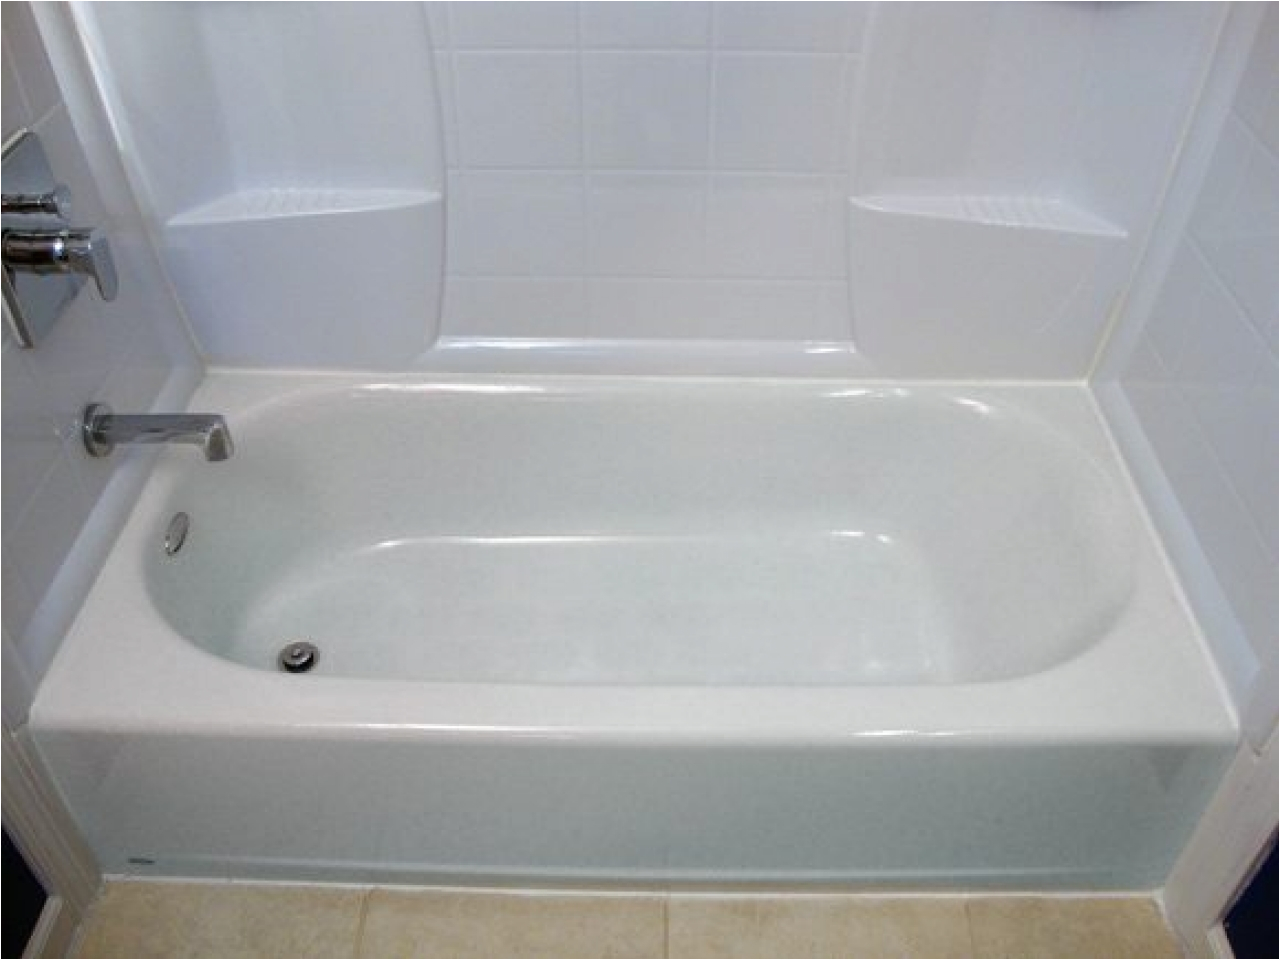 Shop a Wide Variety of Bathtubs on Houzz - Walk-in, Freestanding, and More!